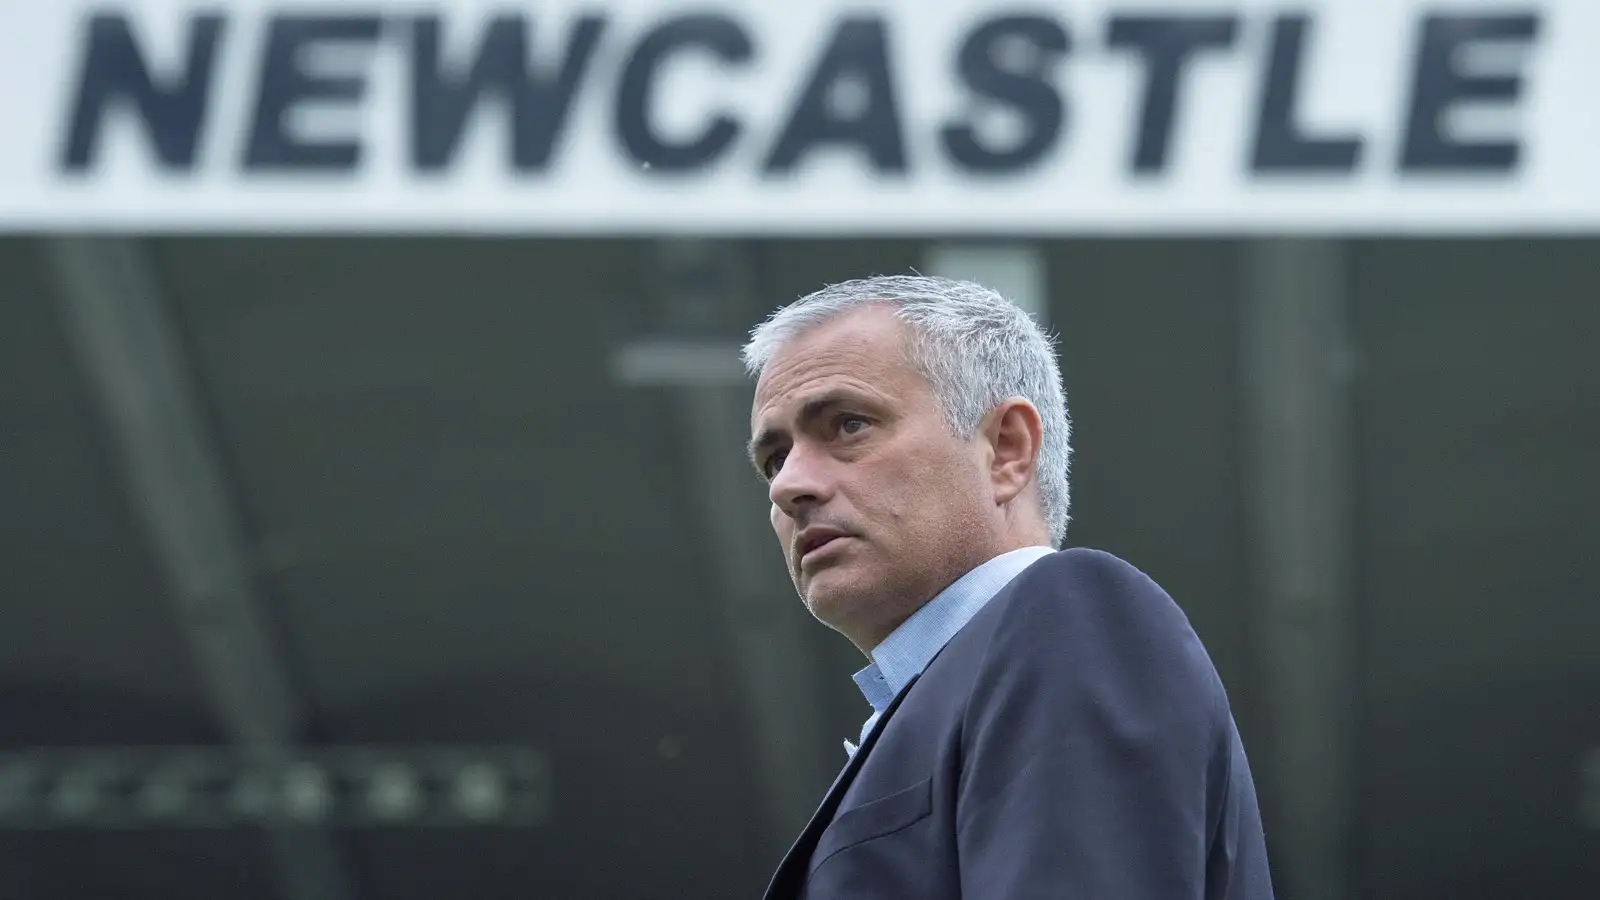 Jose Mourinho at St James' Park before a game against Newcastle.